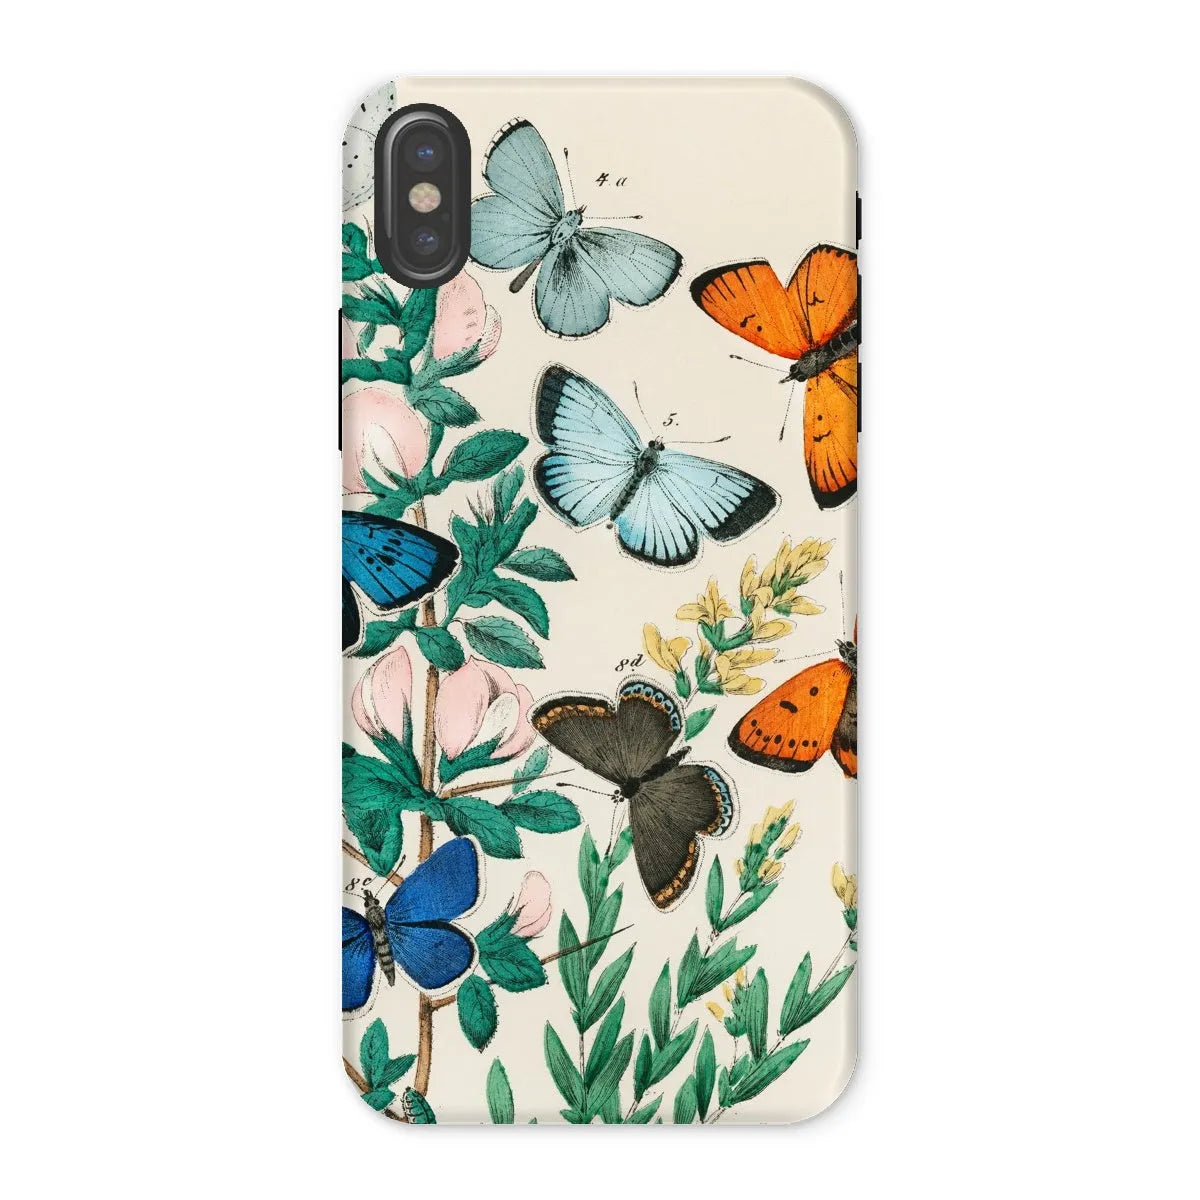 European Butterflies And Moths Art Phone Case - William Forsell Kirby - Iphone x / Matte - Mobile Phone Cases